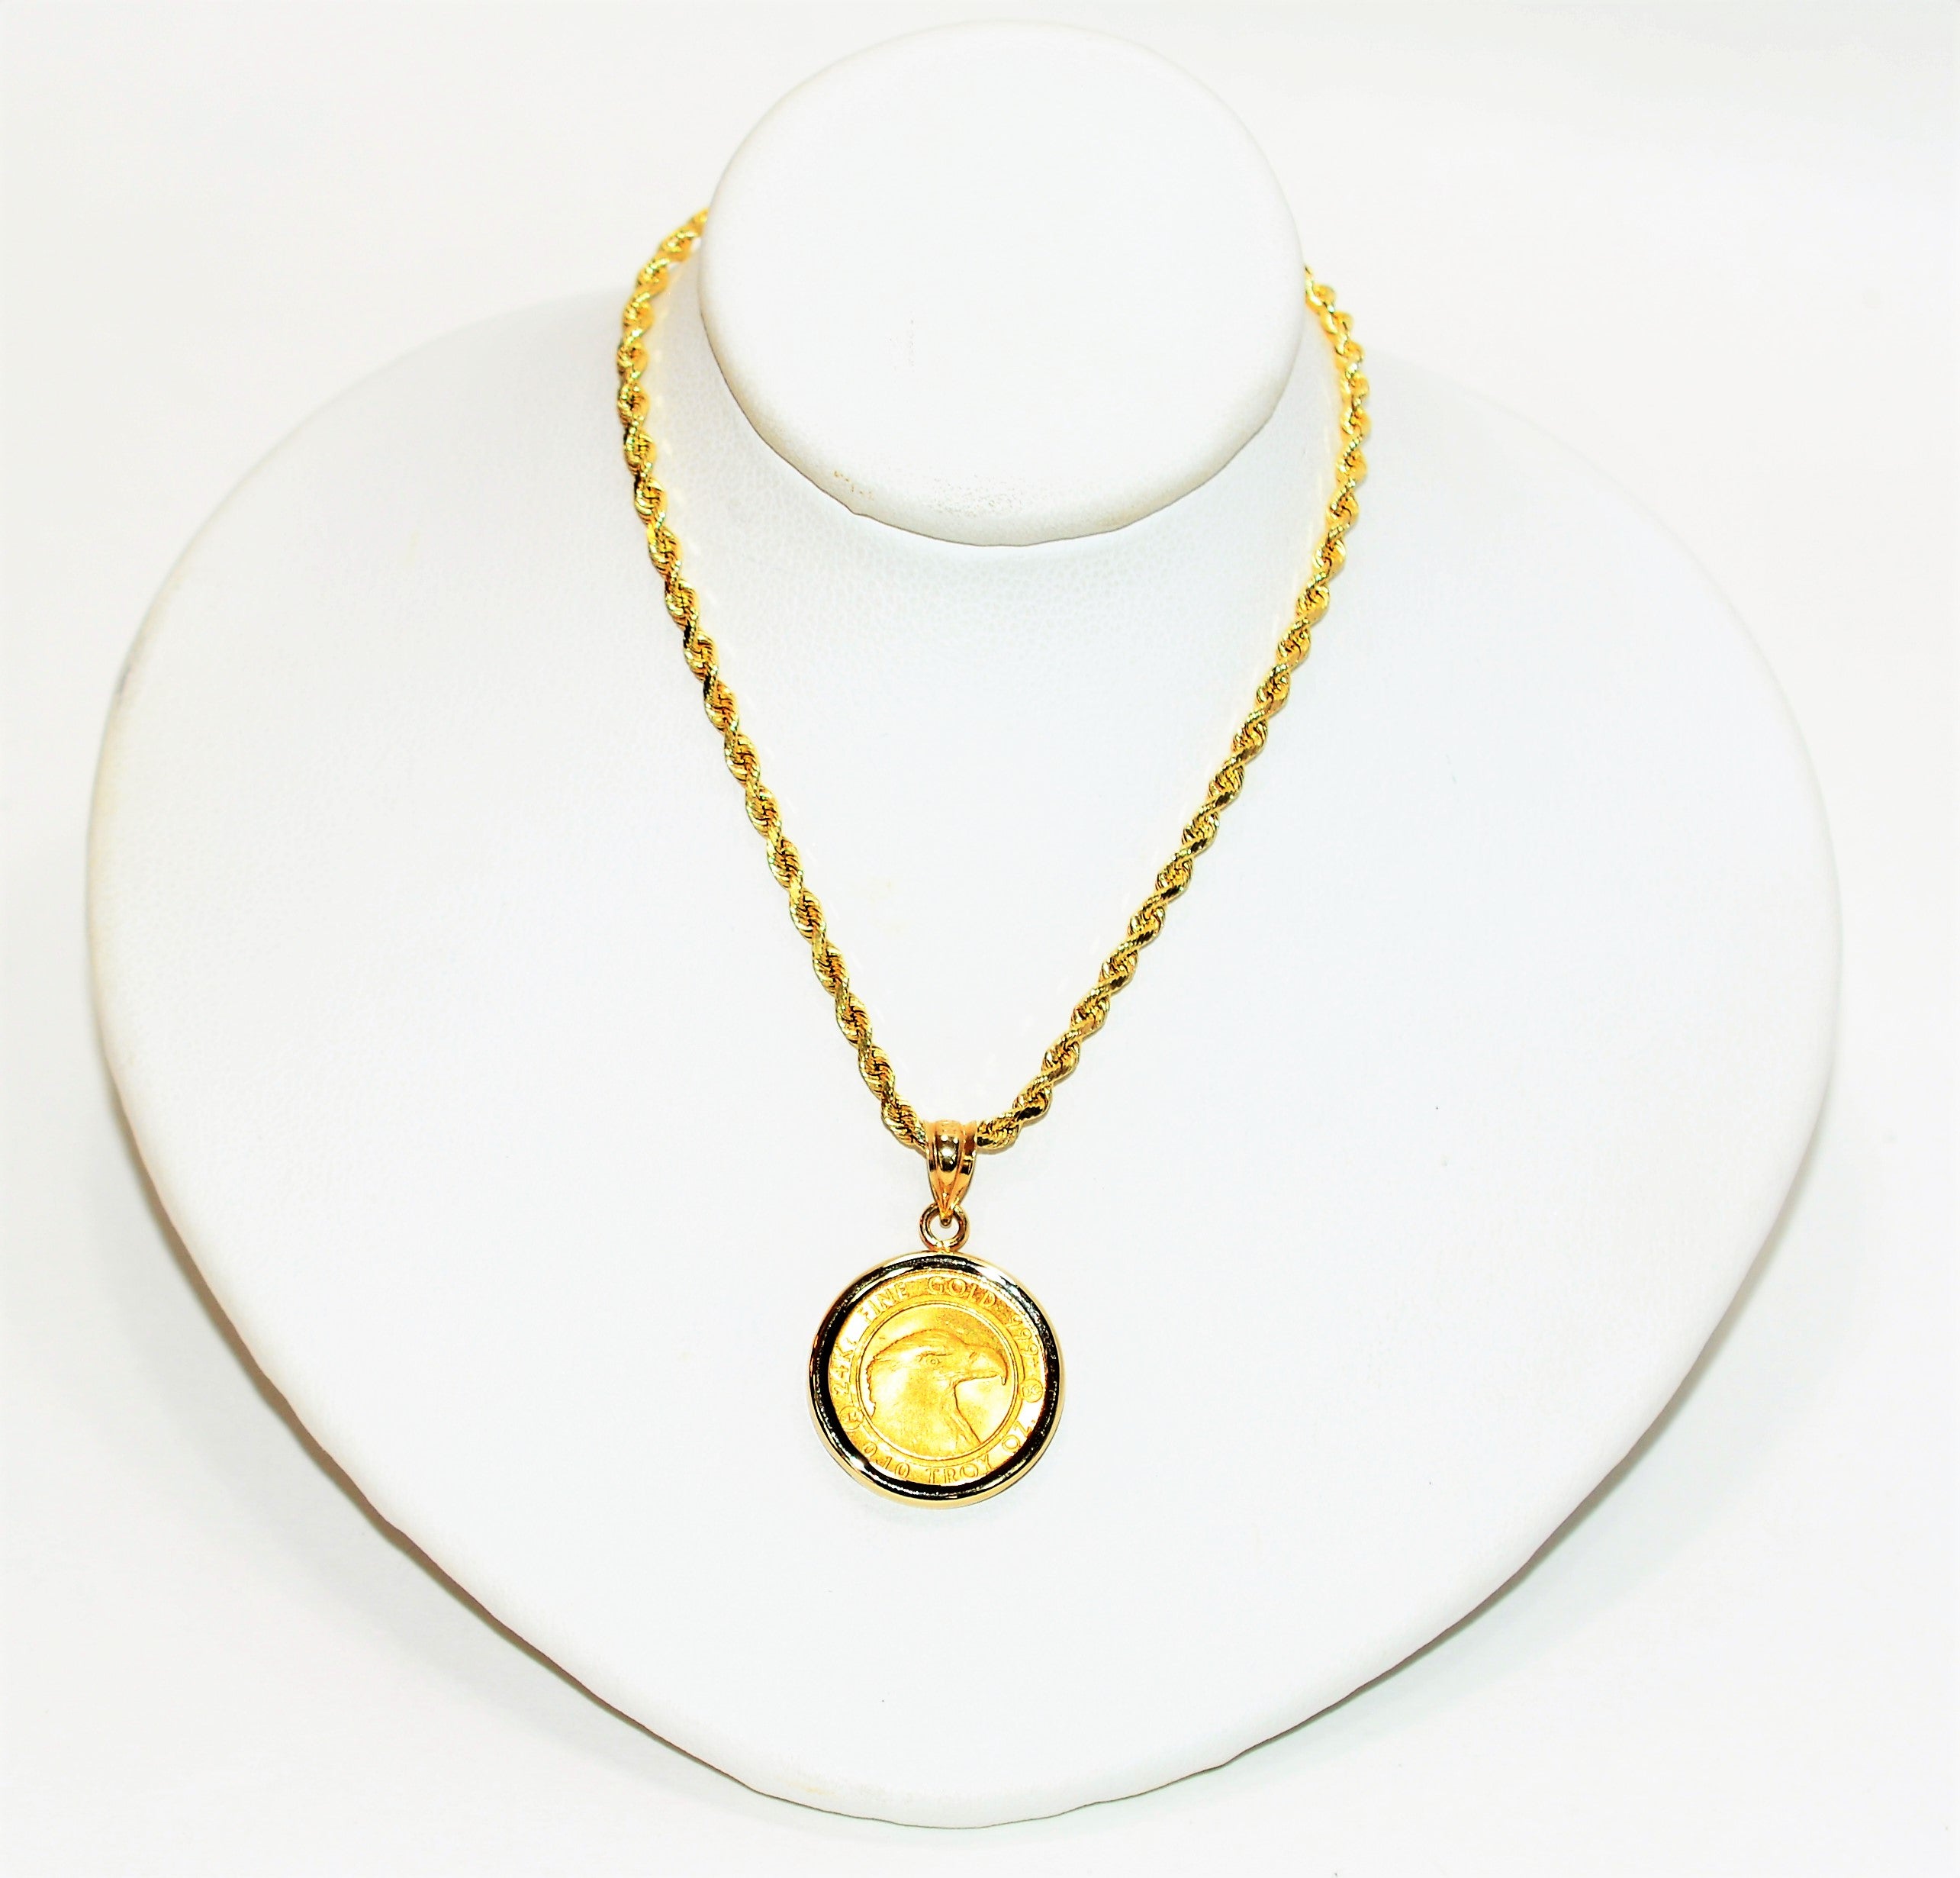 24K Solid Gold .10oz Prospector Gold Round 2021 Coin Necklace 14K Solid Gold Pendant Gold Necklace Coin Necklace Coin Pendant Ingot Jewelry